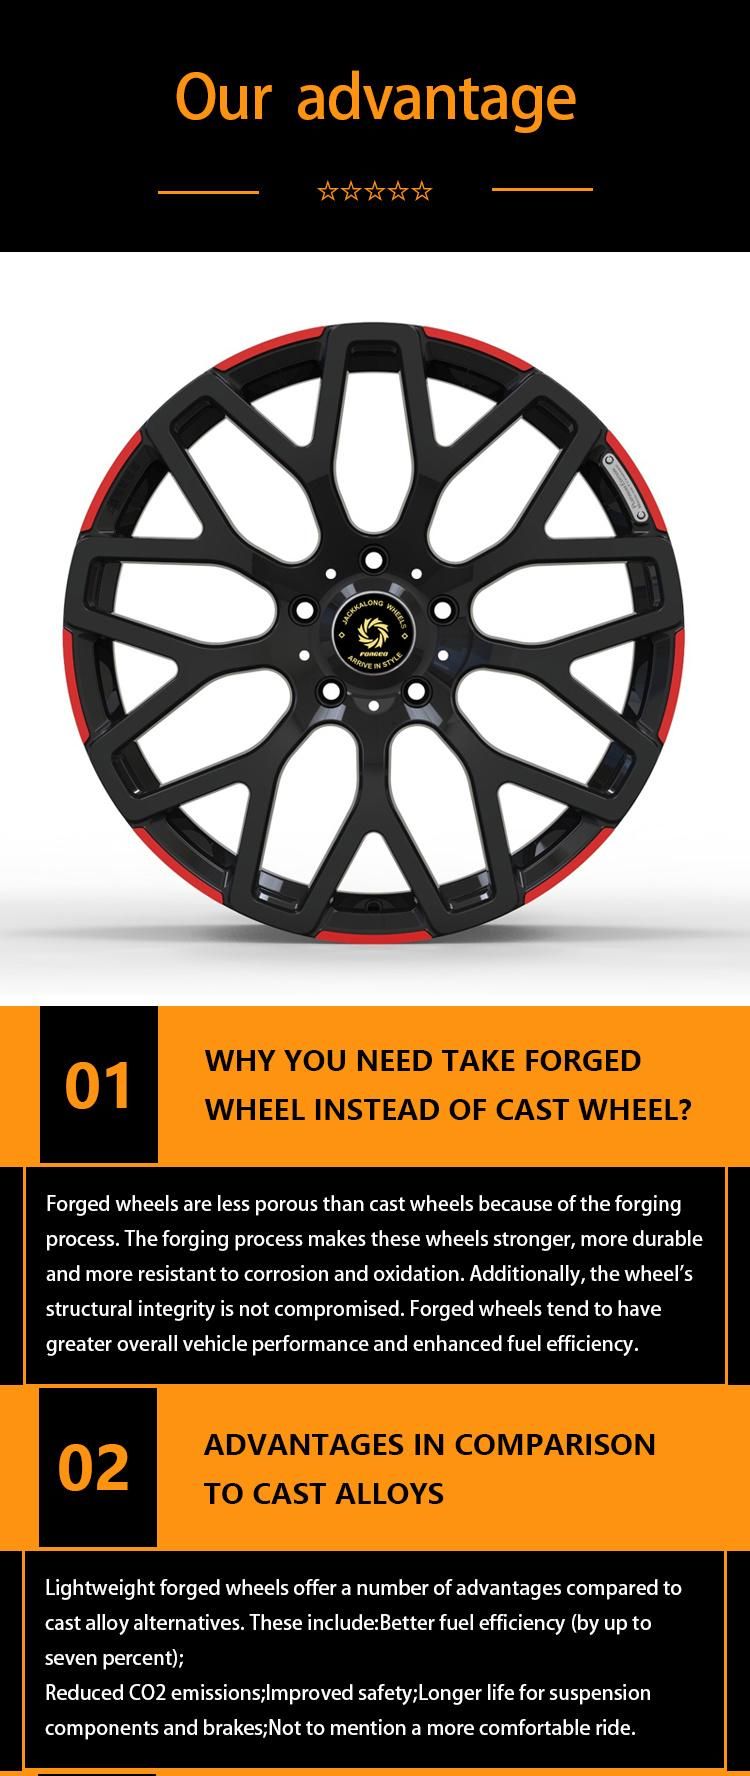 1 Piece Forged T6061 Alloy Rims Sport Aluminum Wheels for Customized T6061 Material with Matt Black+Milling Engravings